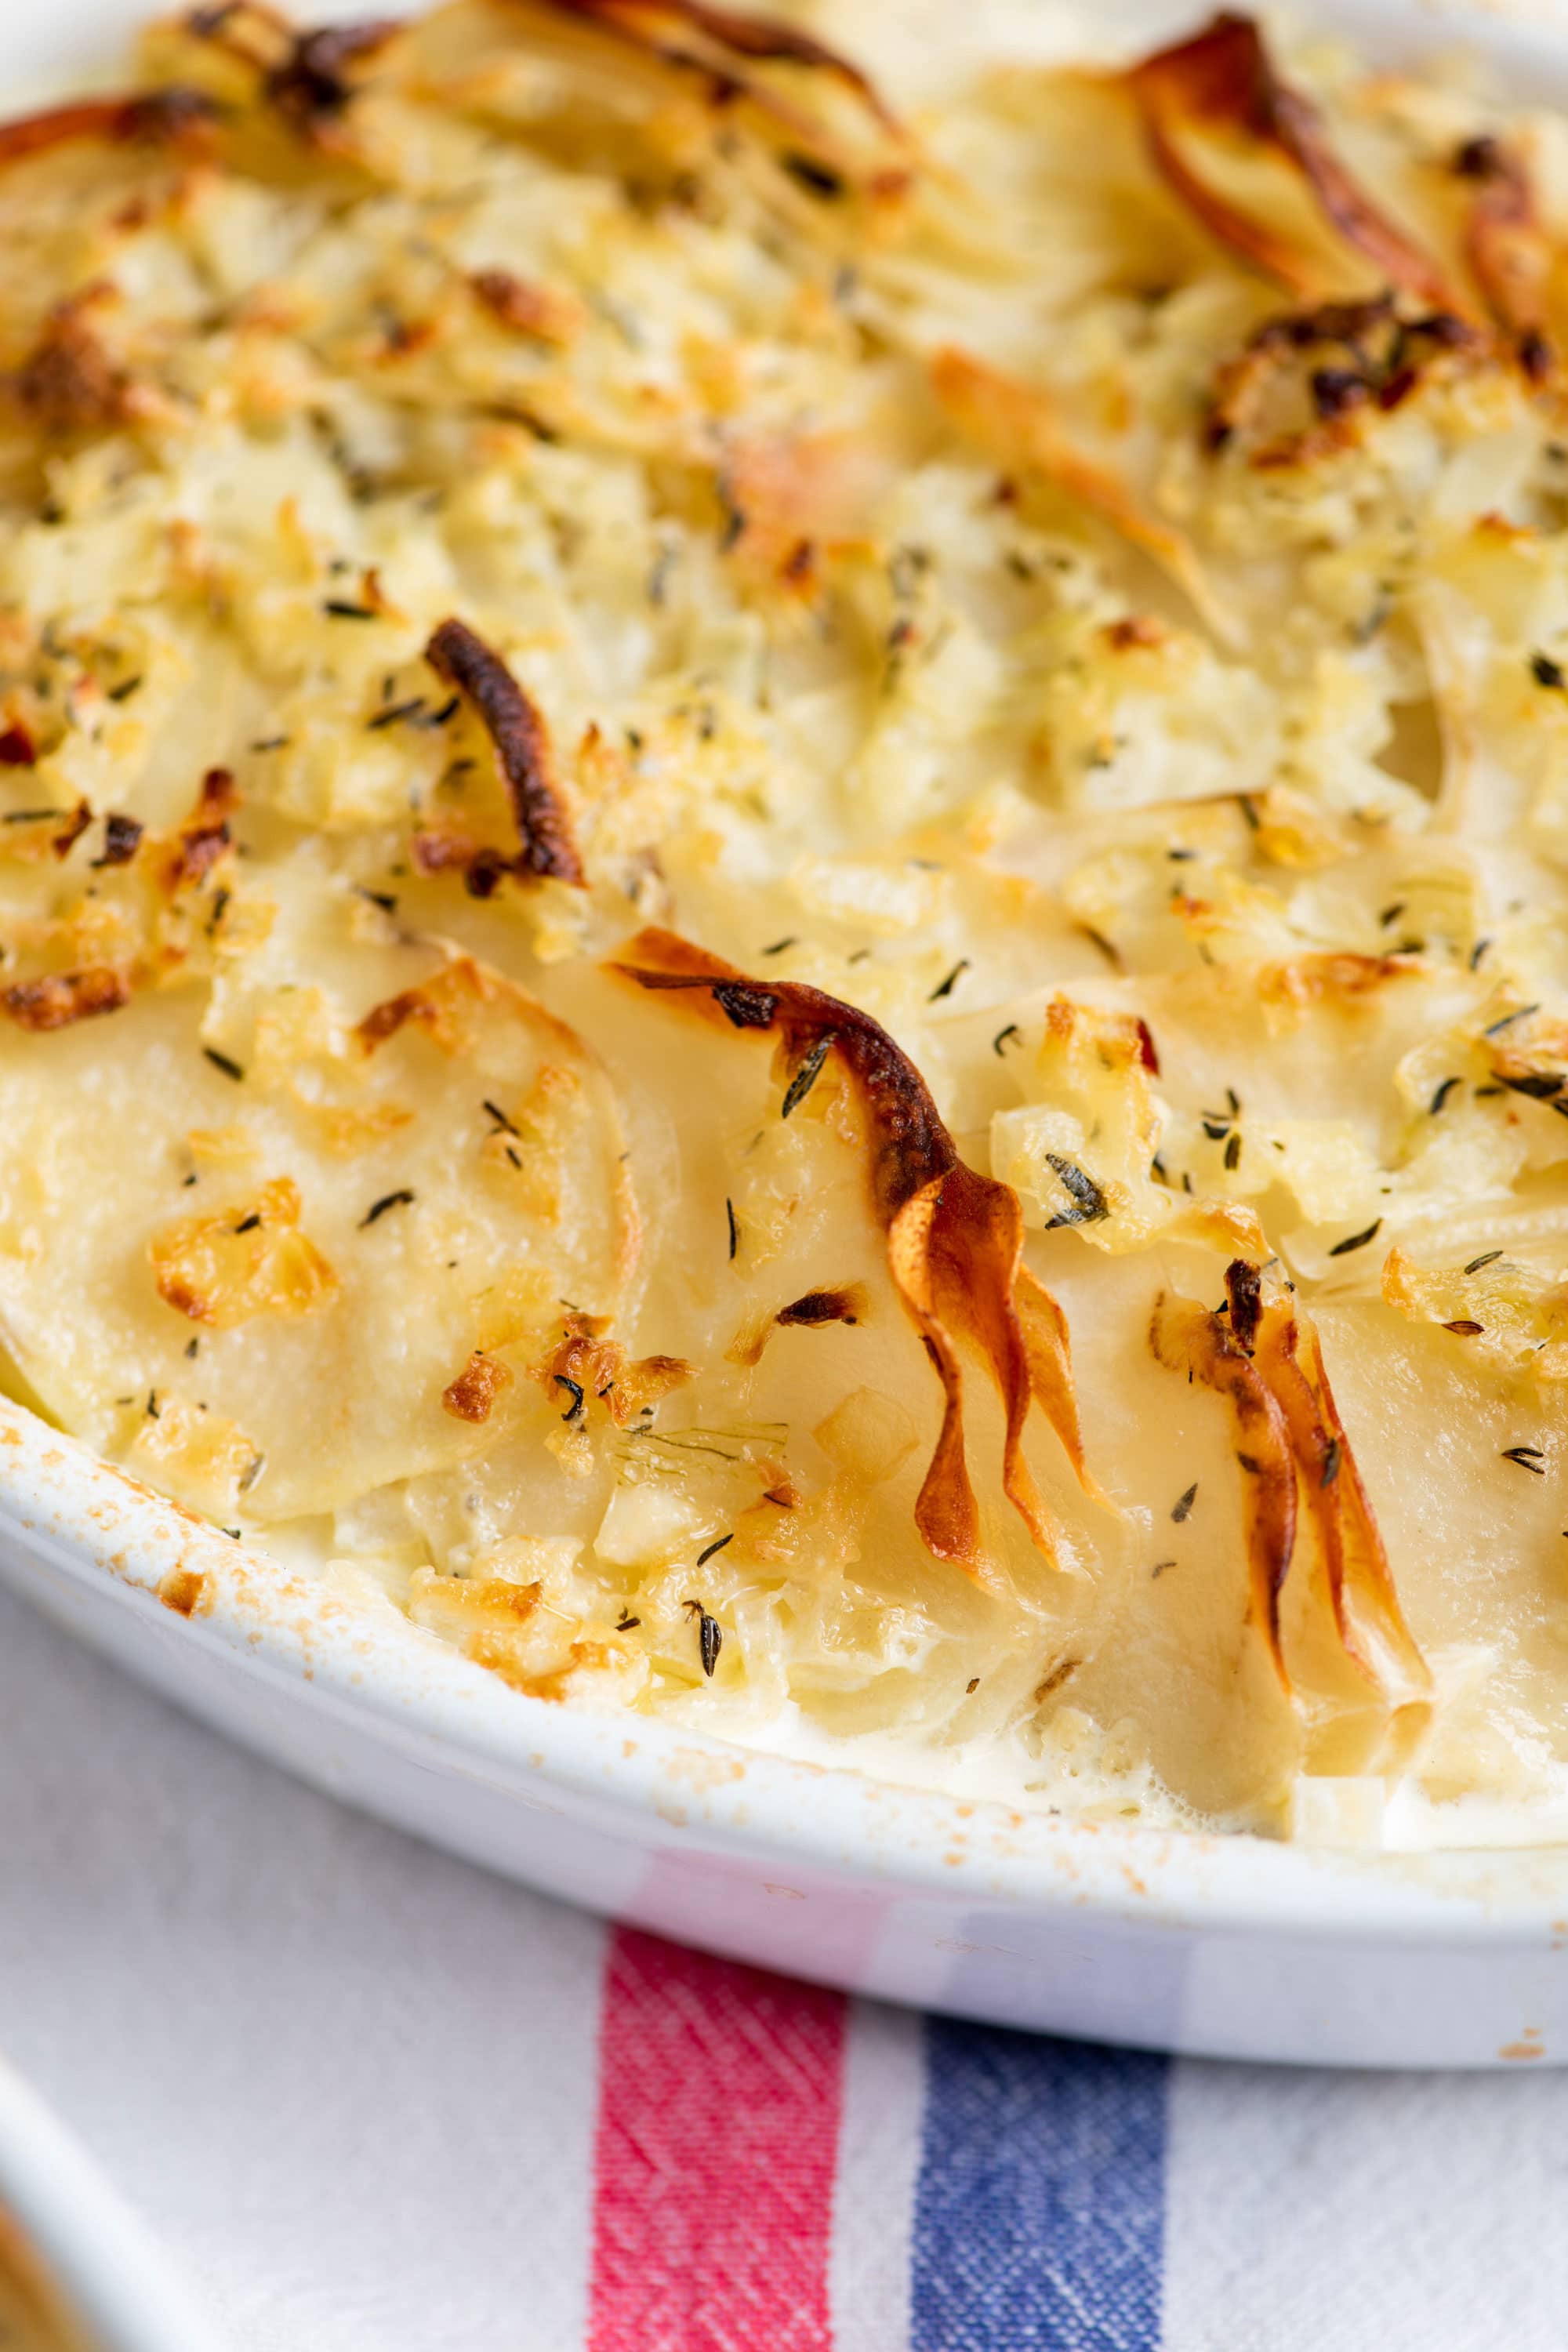 Creamy Scalloped Potatoes with crispy top in white baking dish.